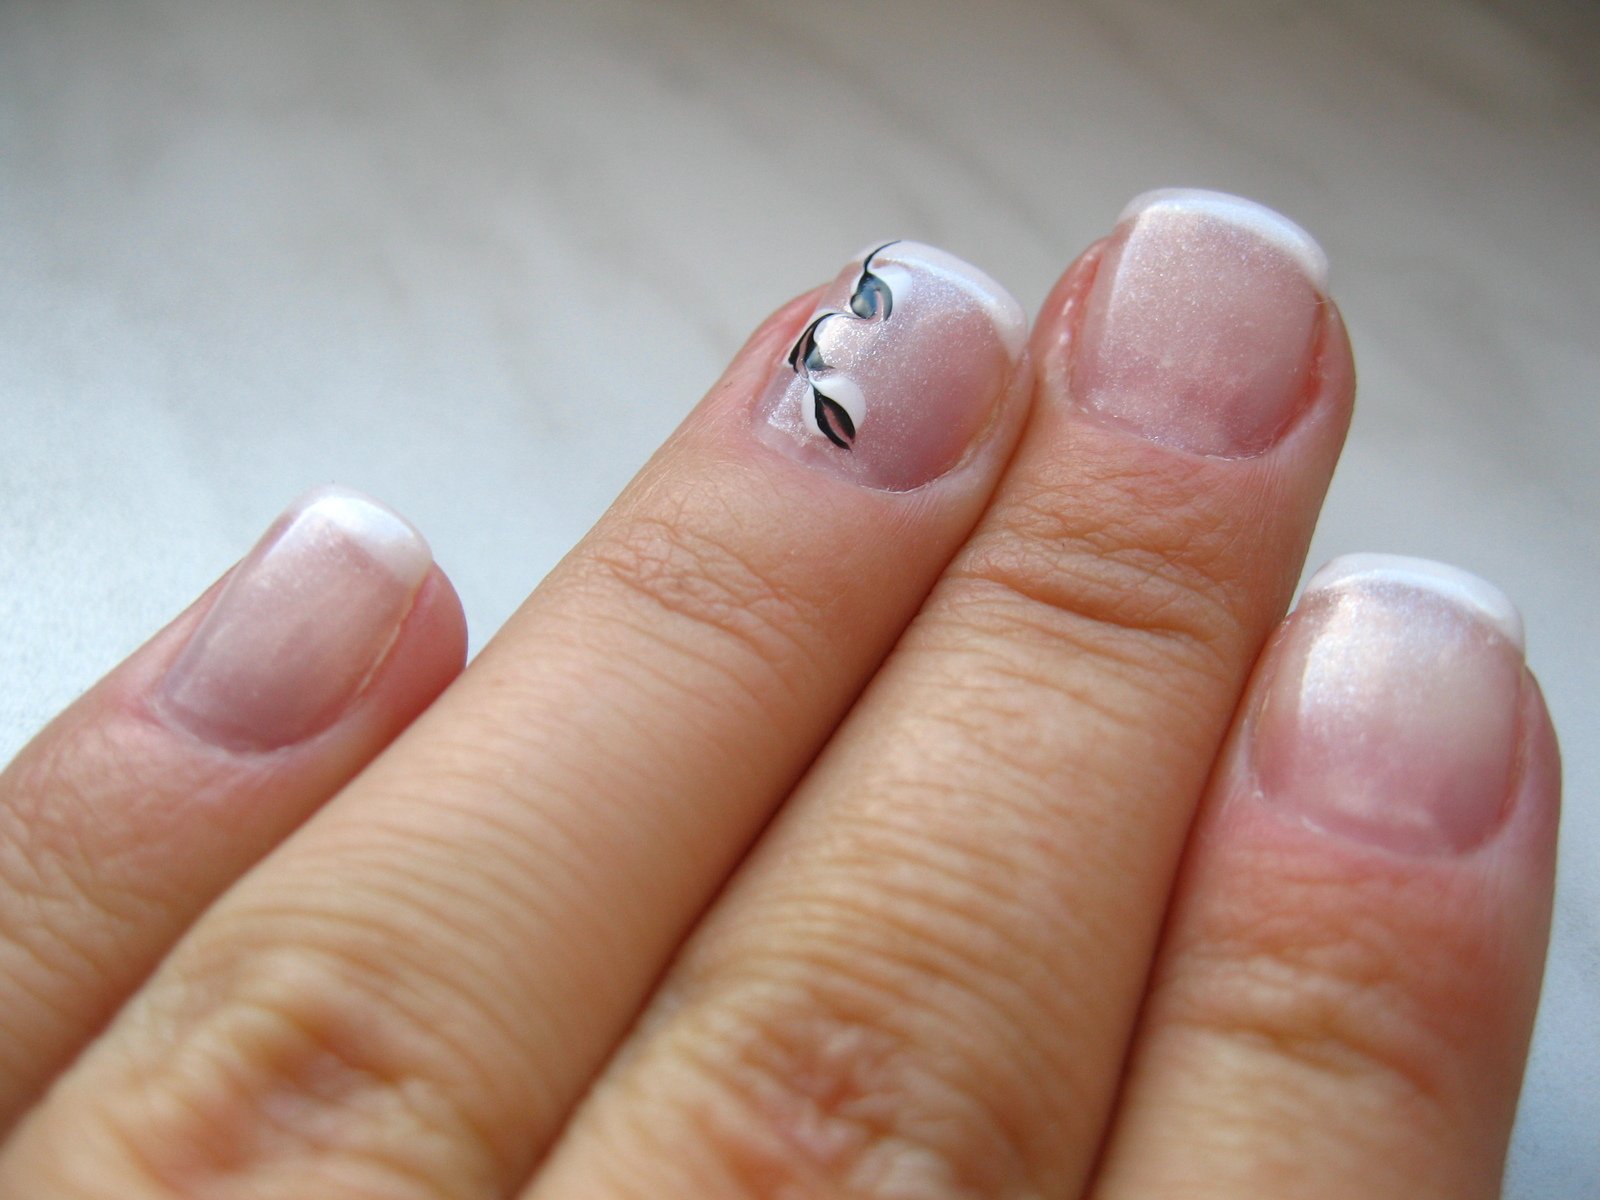 a person with a white and black nail polish on their fingers